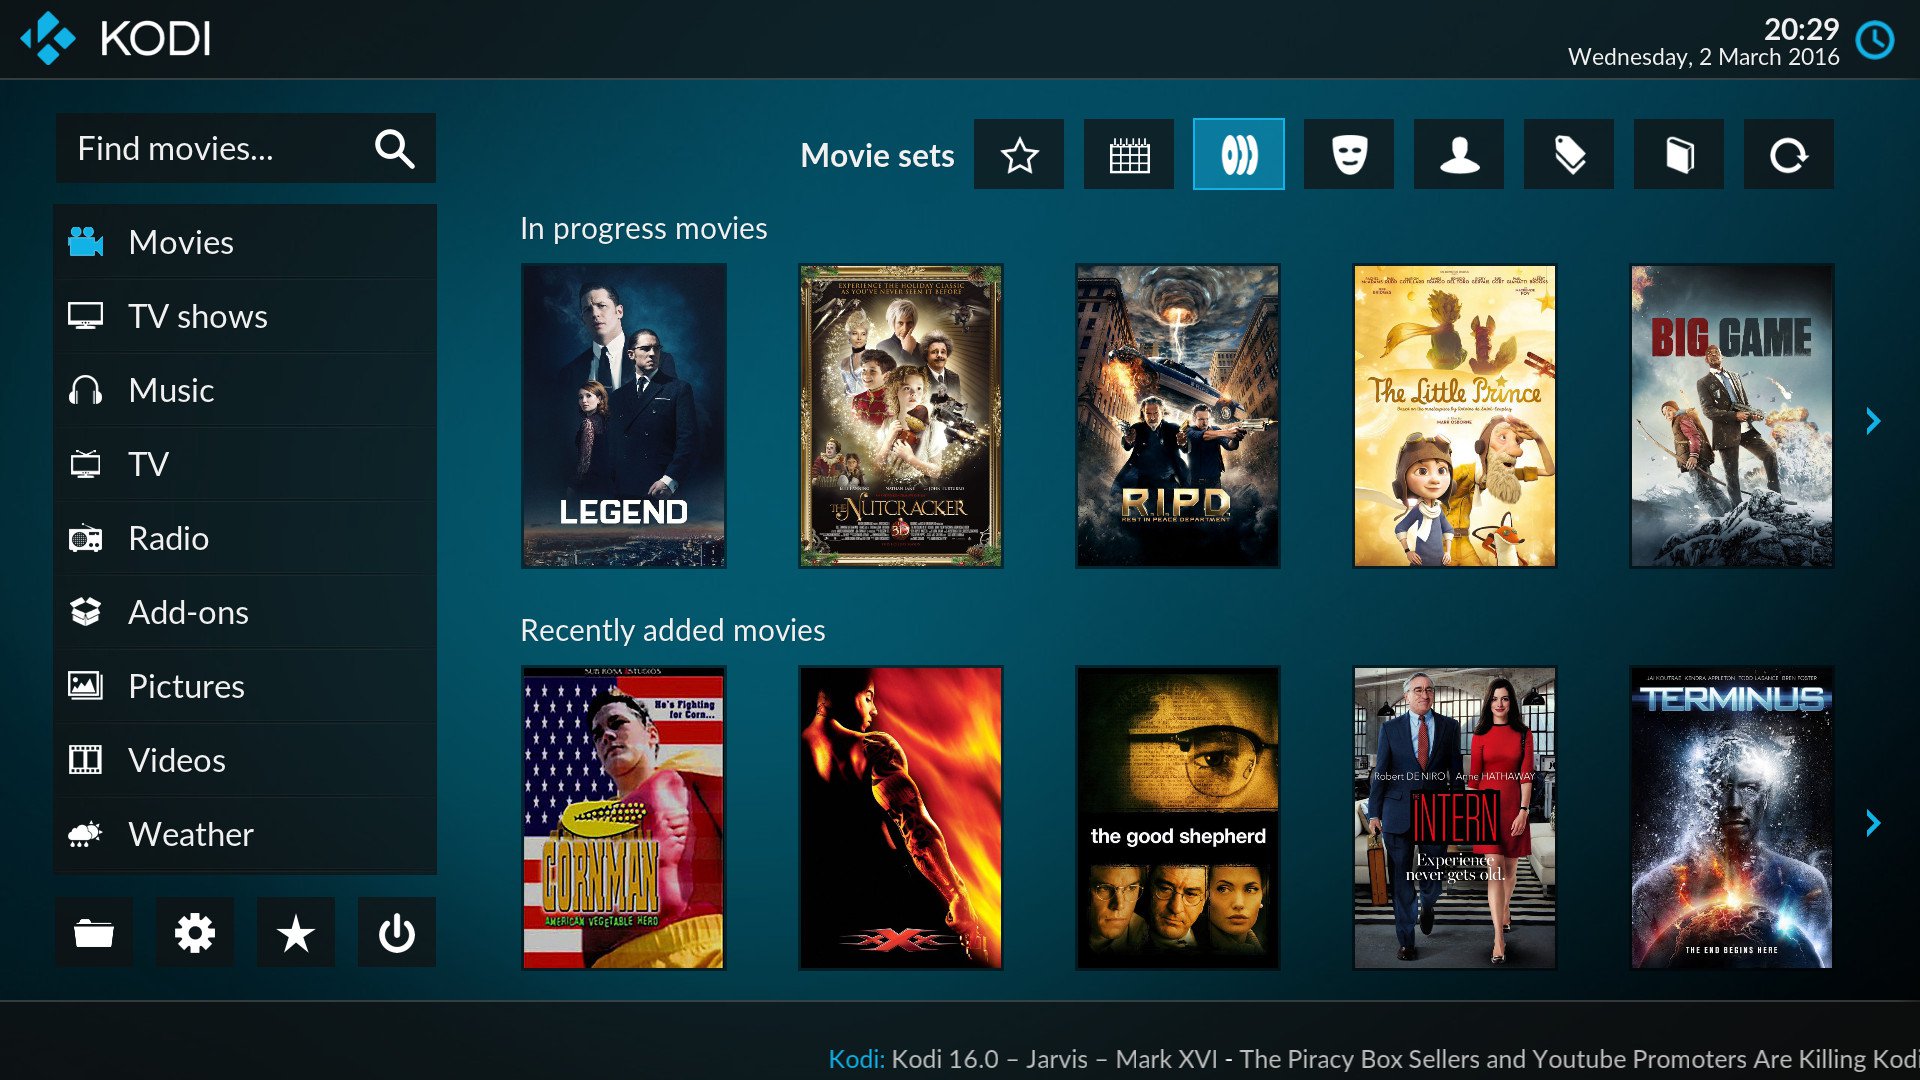 Find detailed information about Kodi